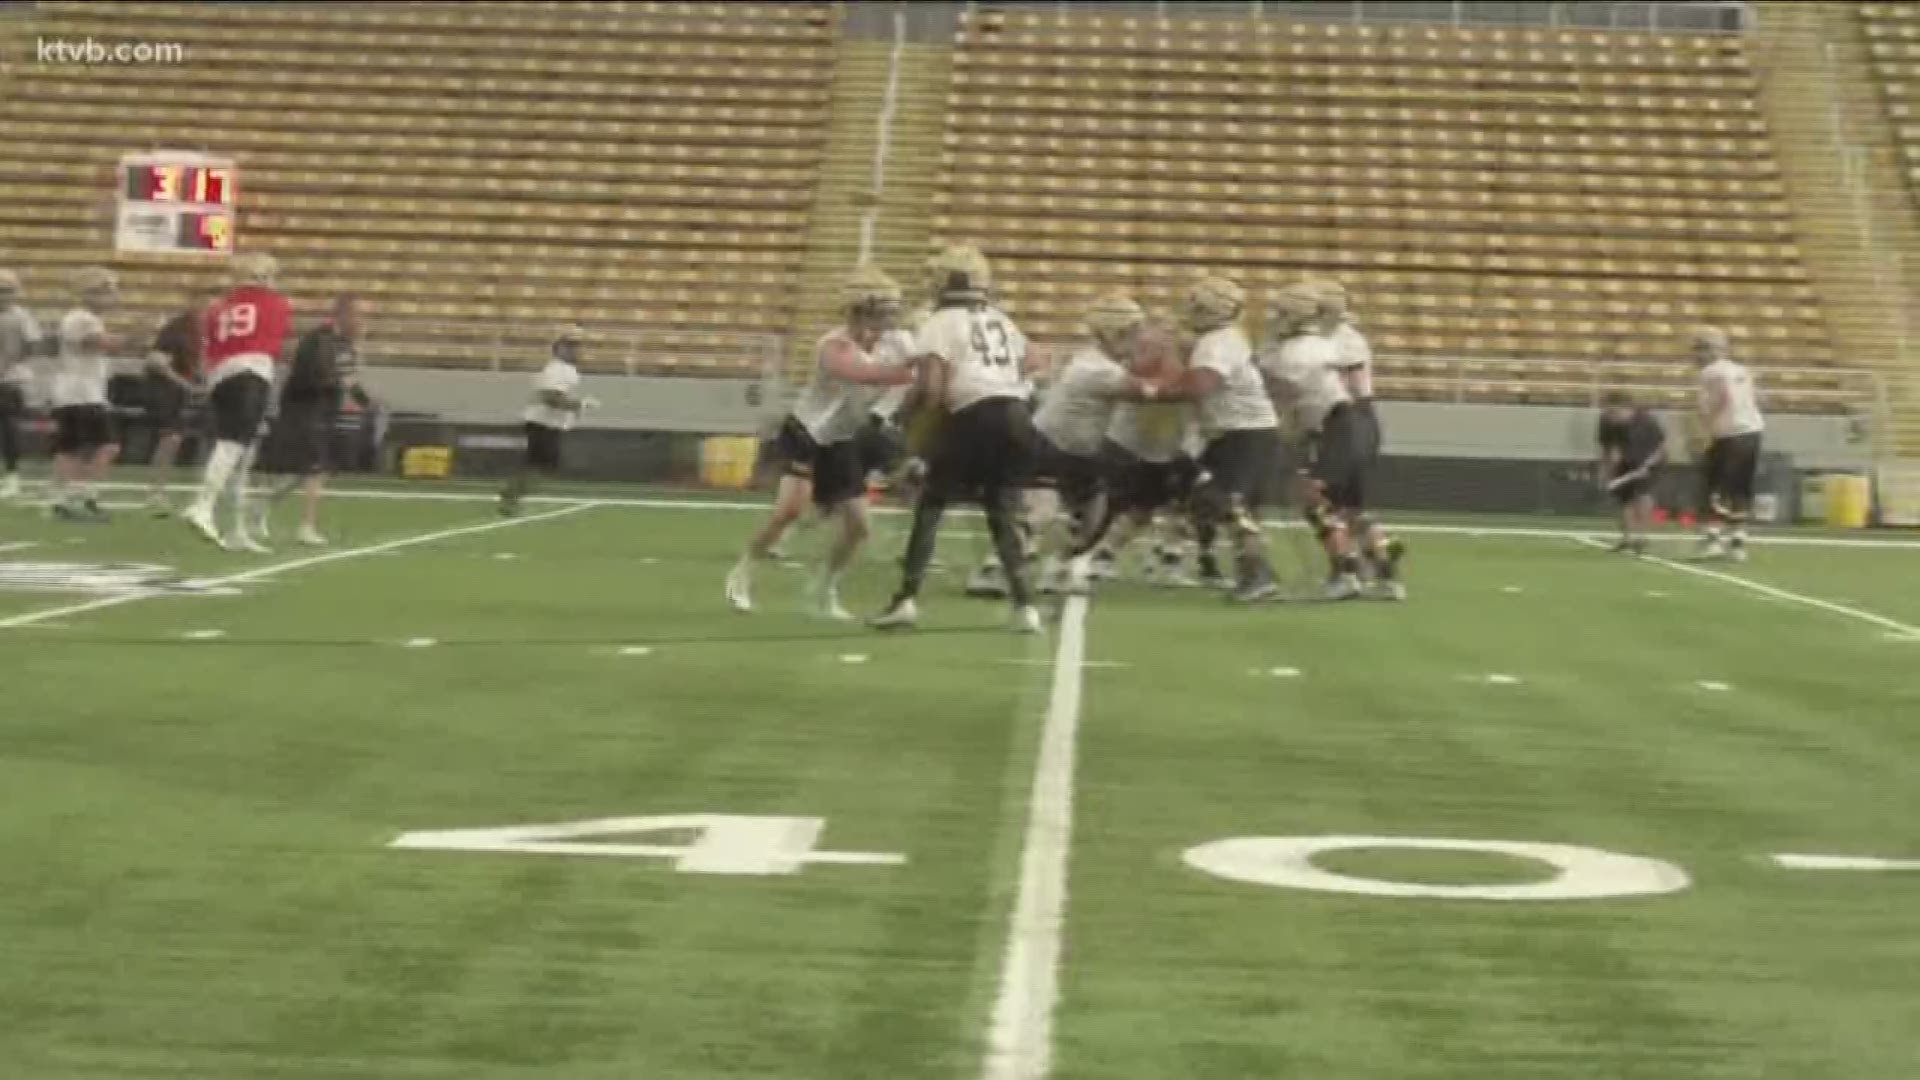 With two experienced quarterbacks entering spring camp, the Vandals are working to see who will lead the team as they enter their second season back in the Big Sky Conference.